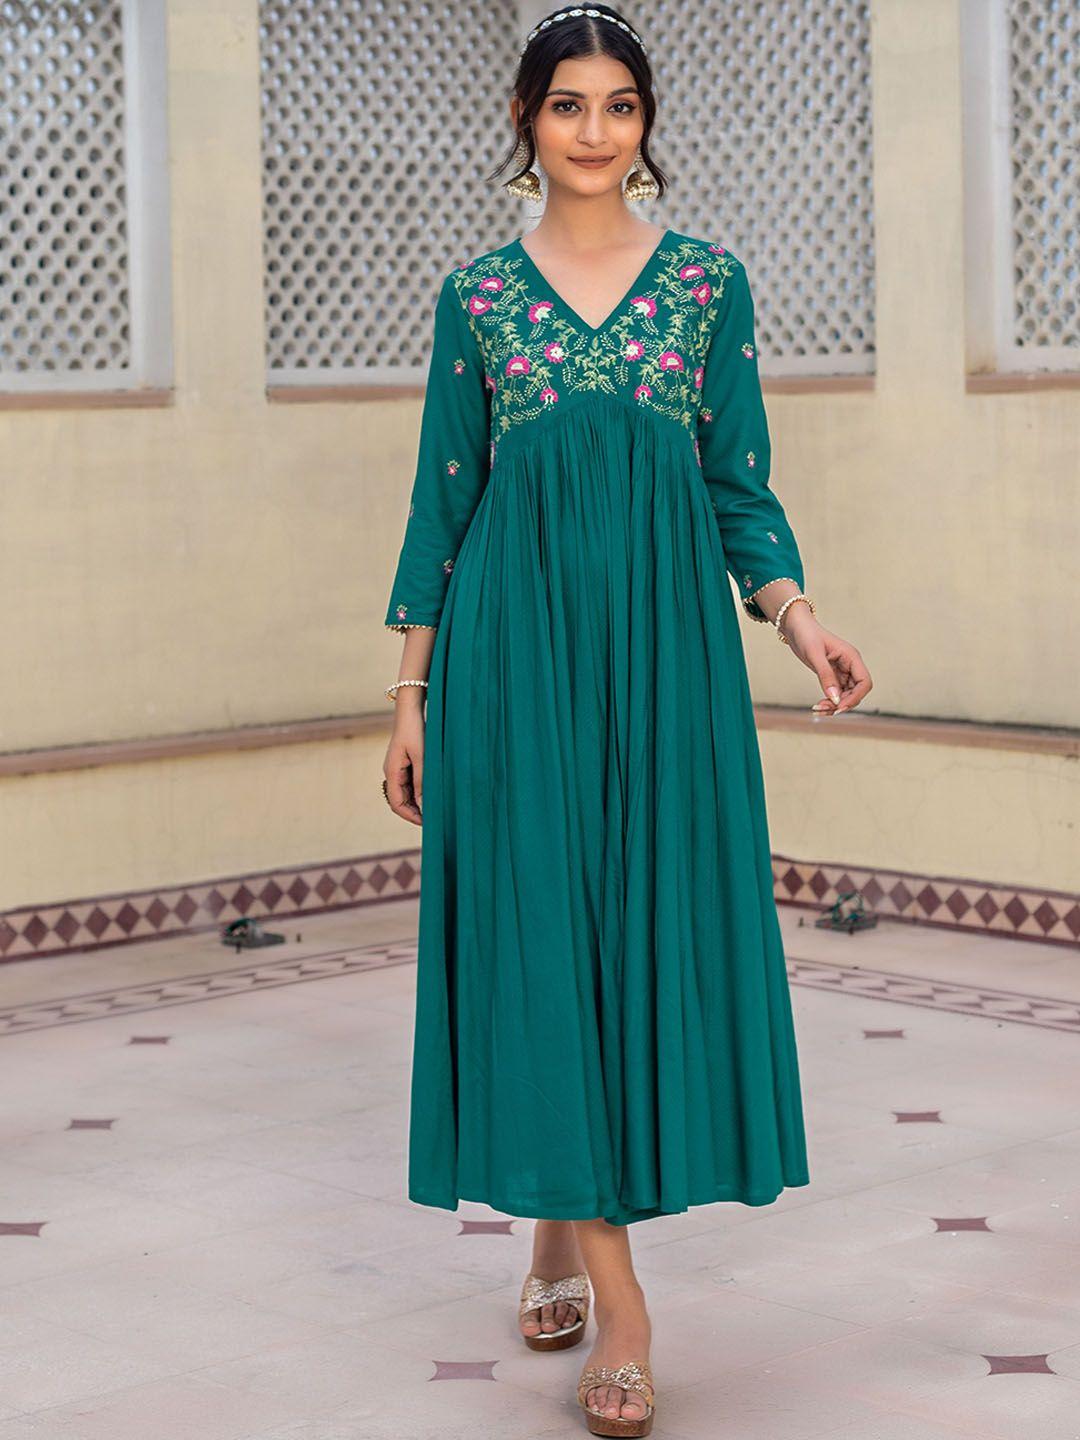 kasya floral embroidered empire ethnic dress